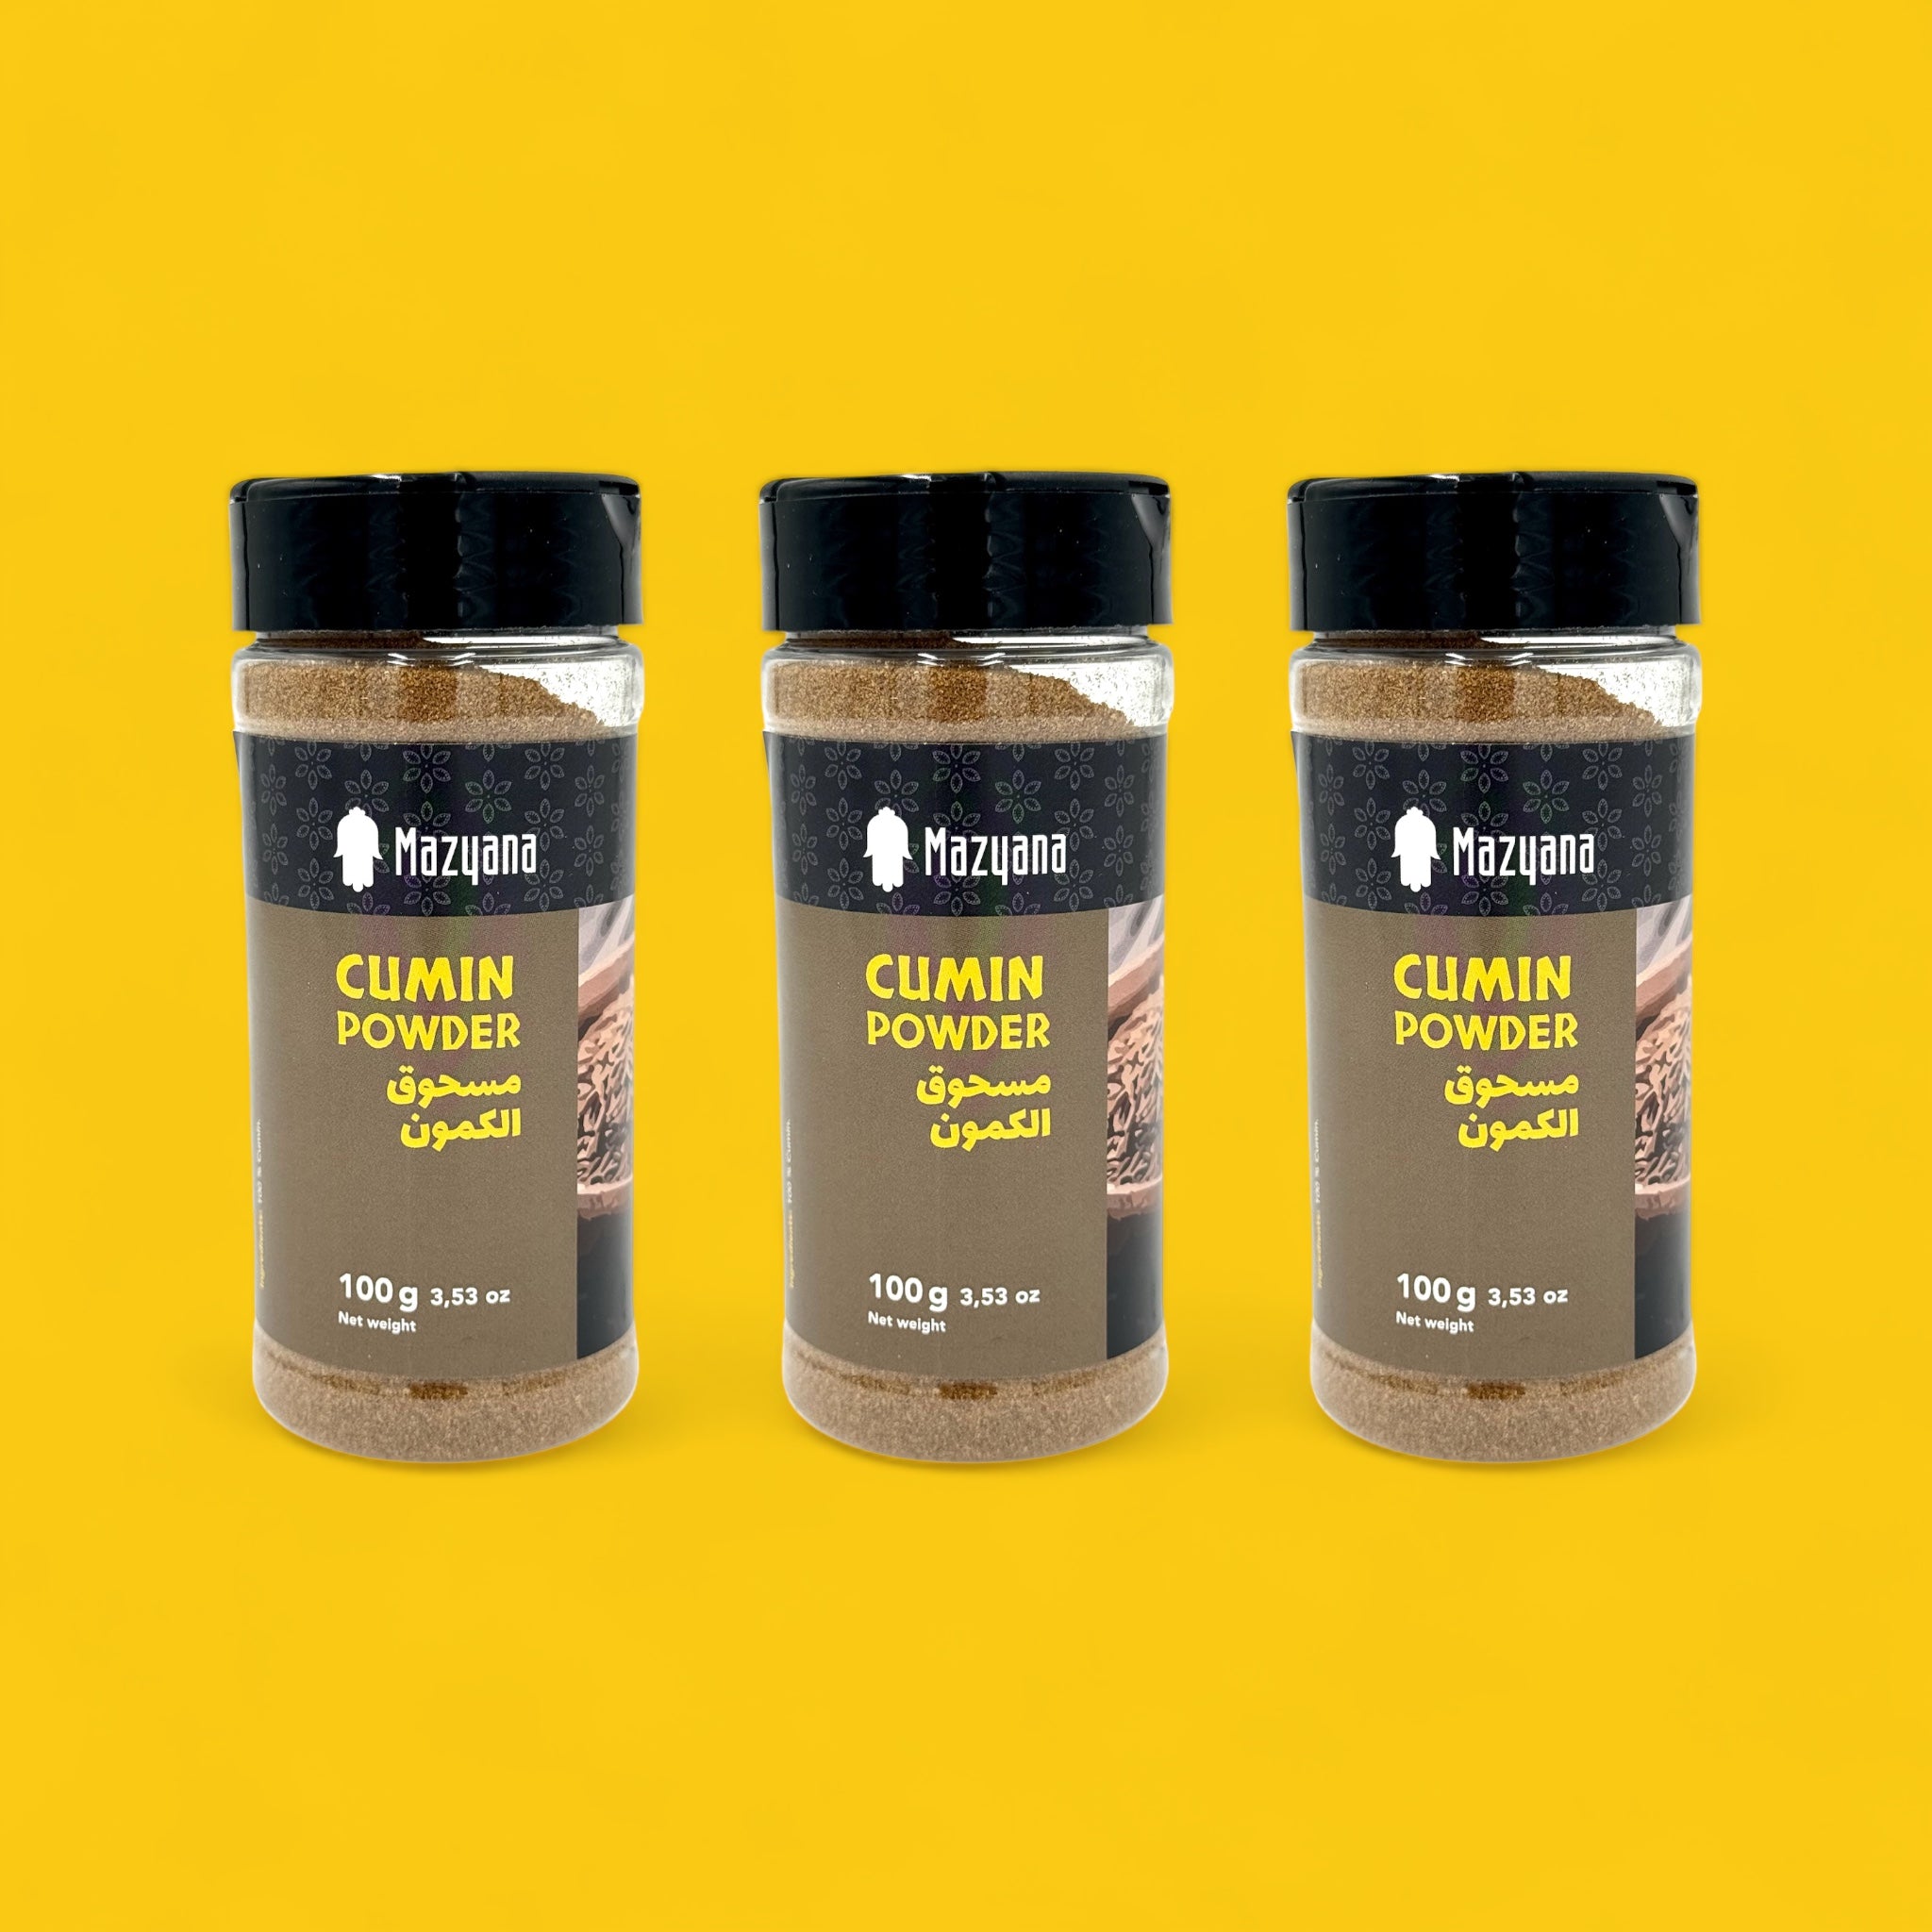 Cumin Powder and Other Moroccan Spices on BSAHA